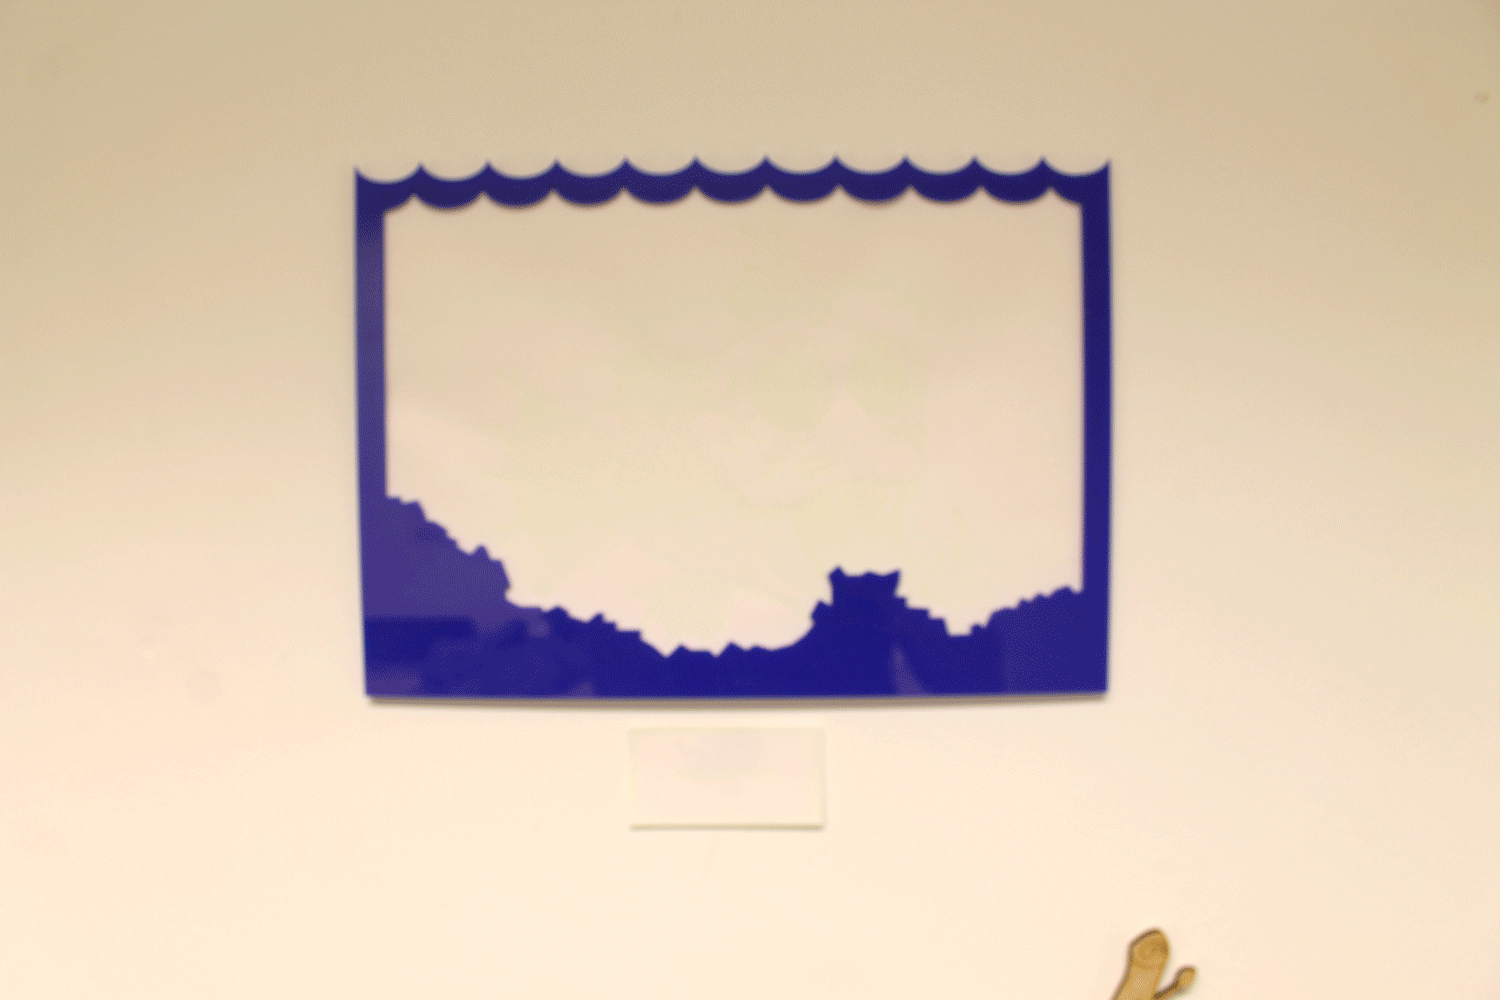 design practice the gallery that glows the exhibition gifs small